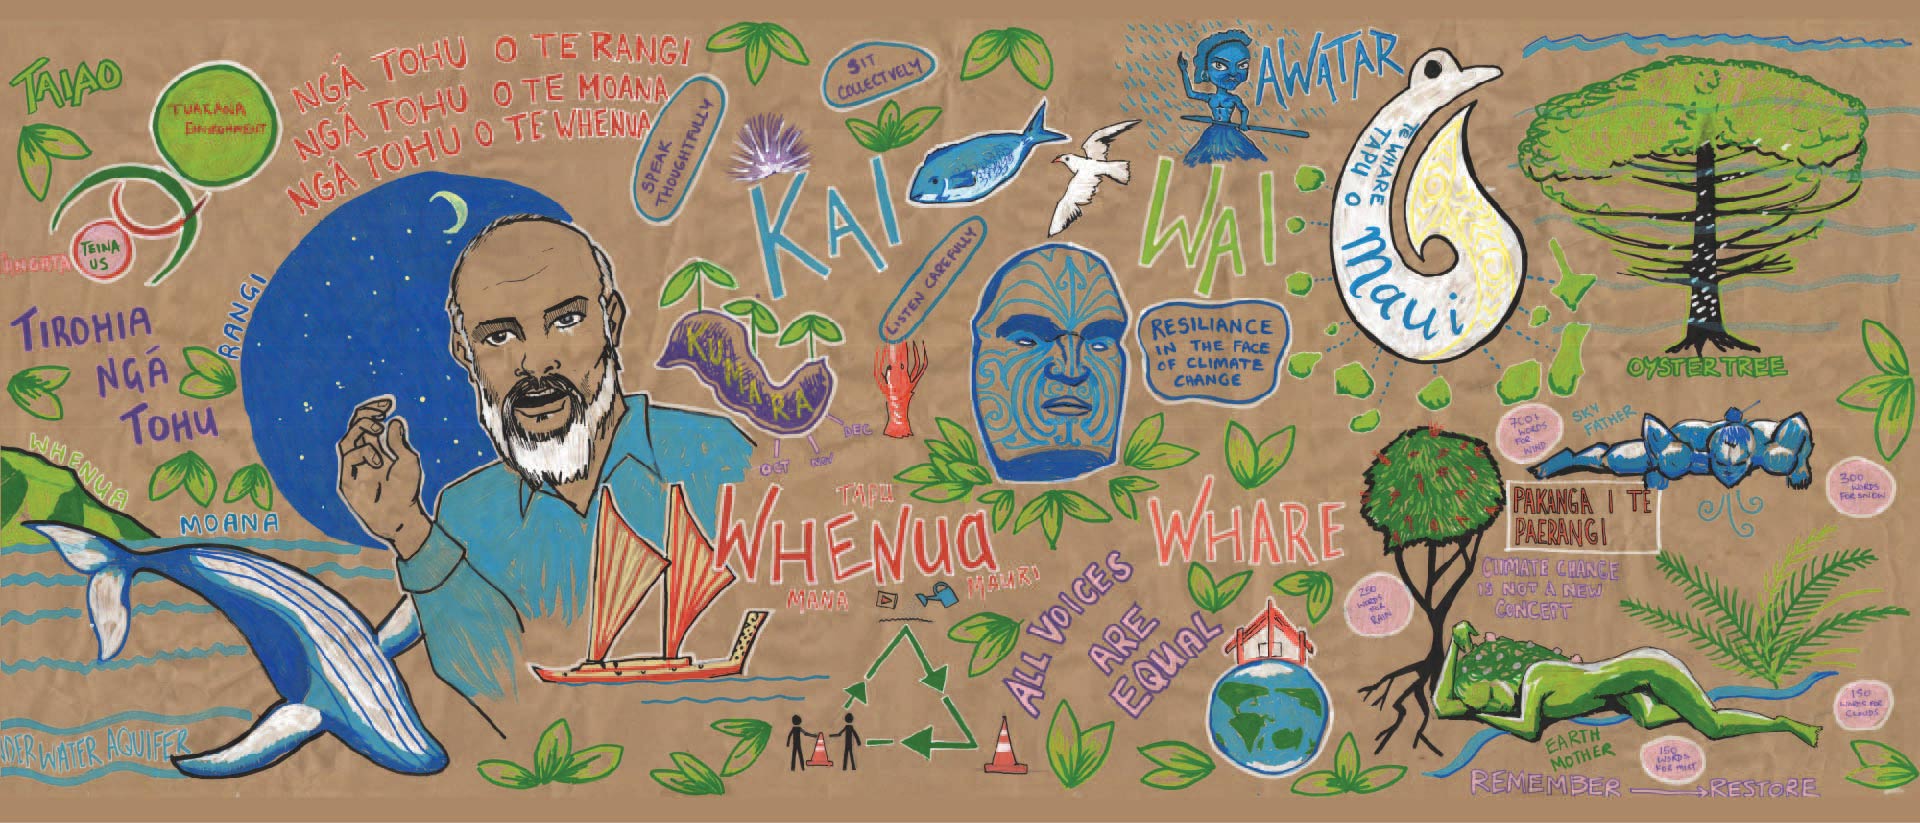 Drawing of Matua Rereata Makiha surrounded by trees, waterways, waka, kai, whare, and other natural elements.